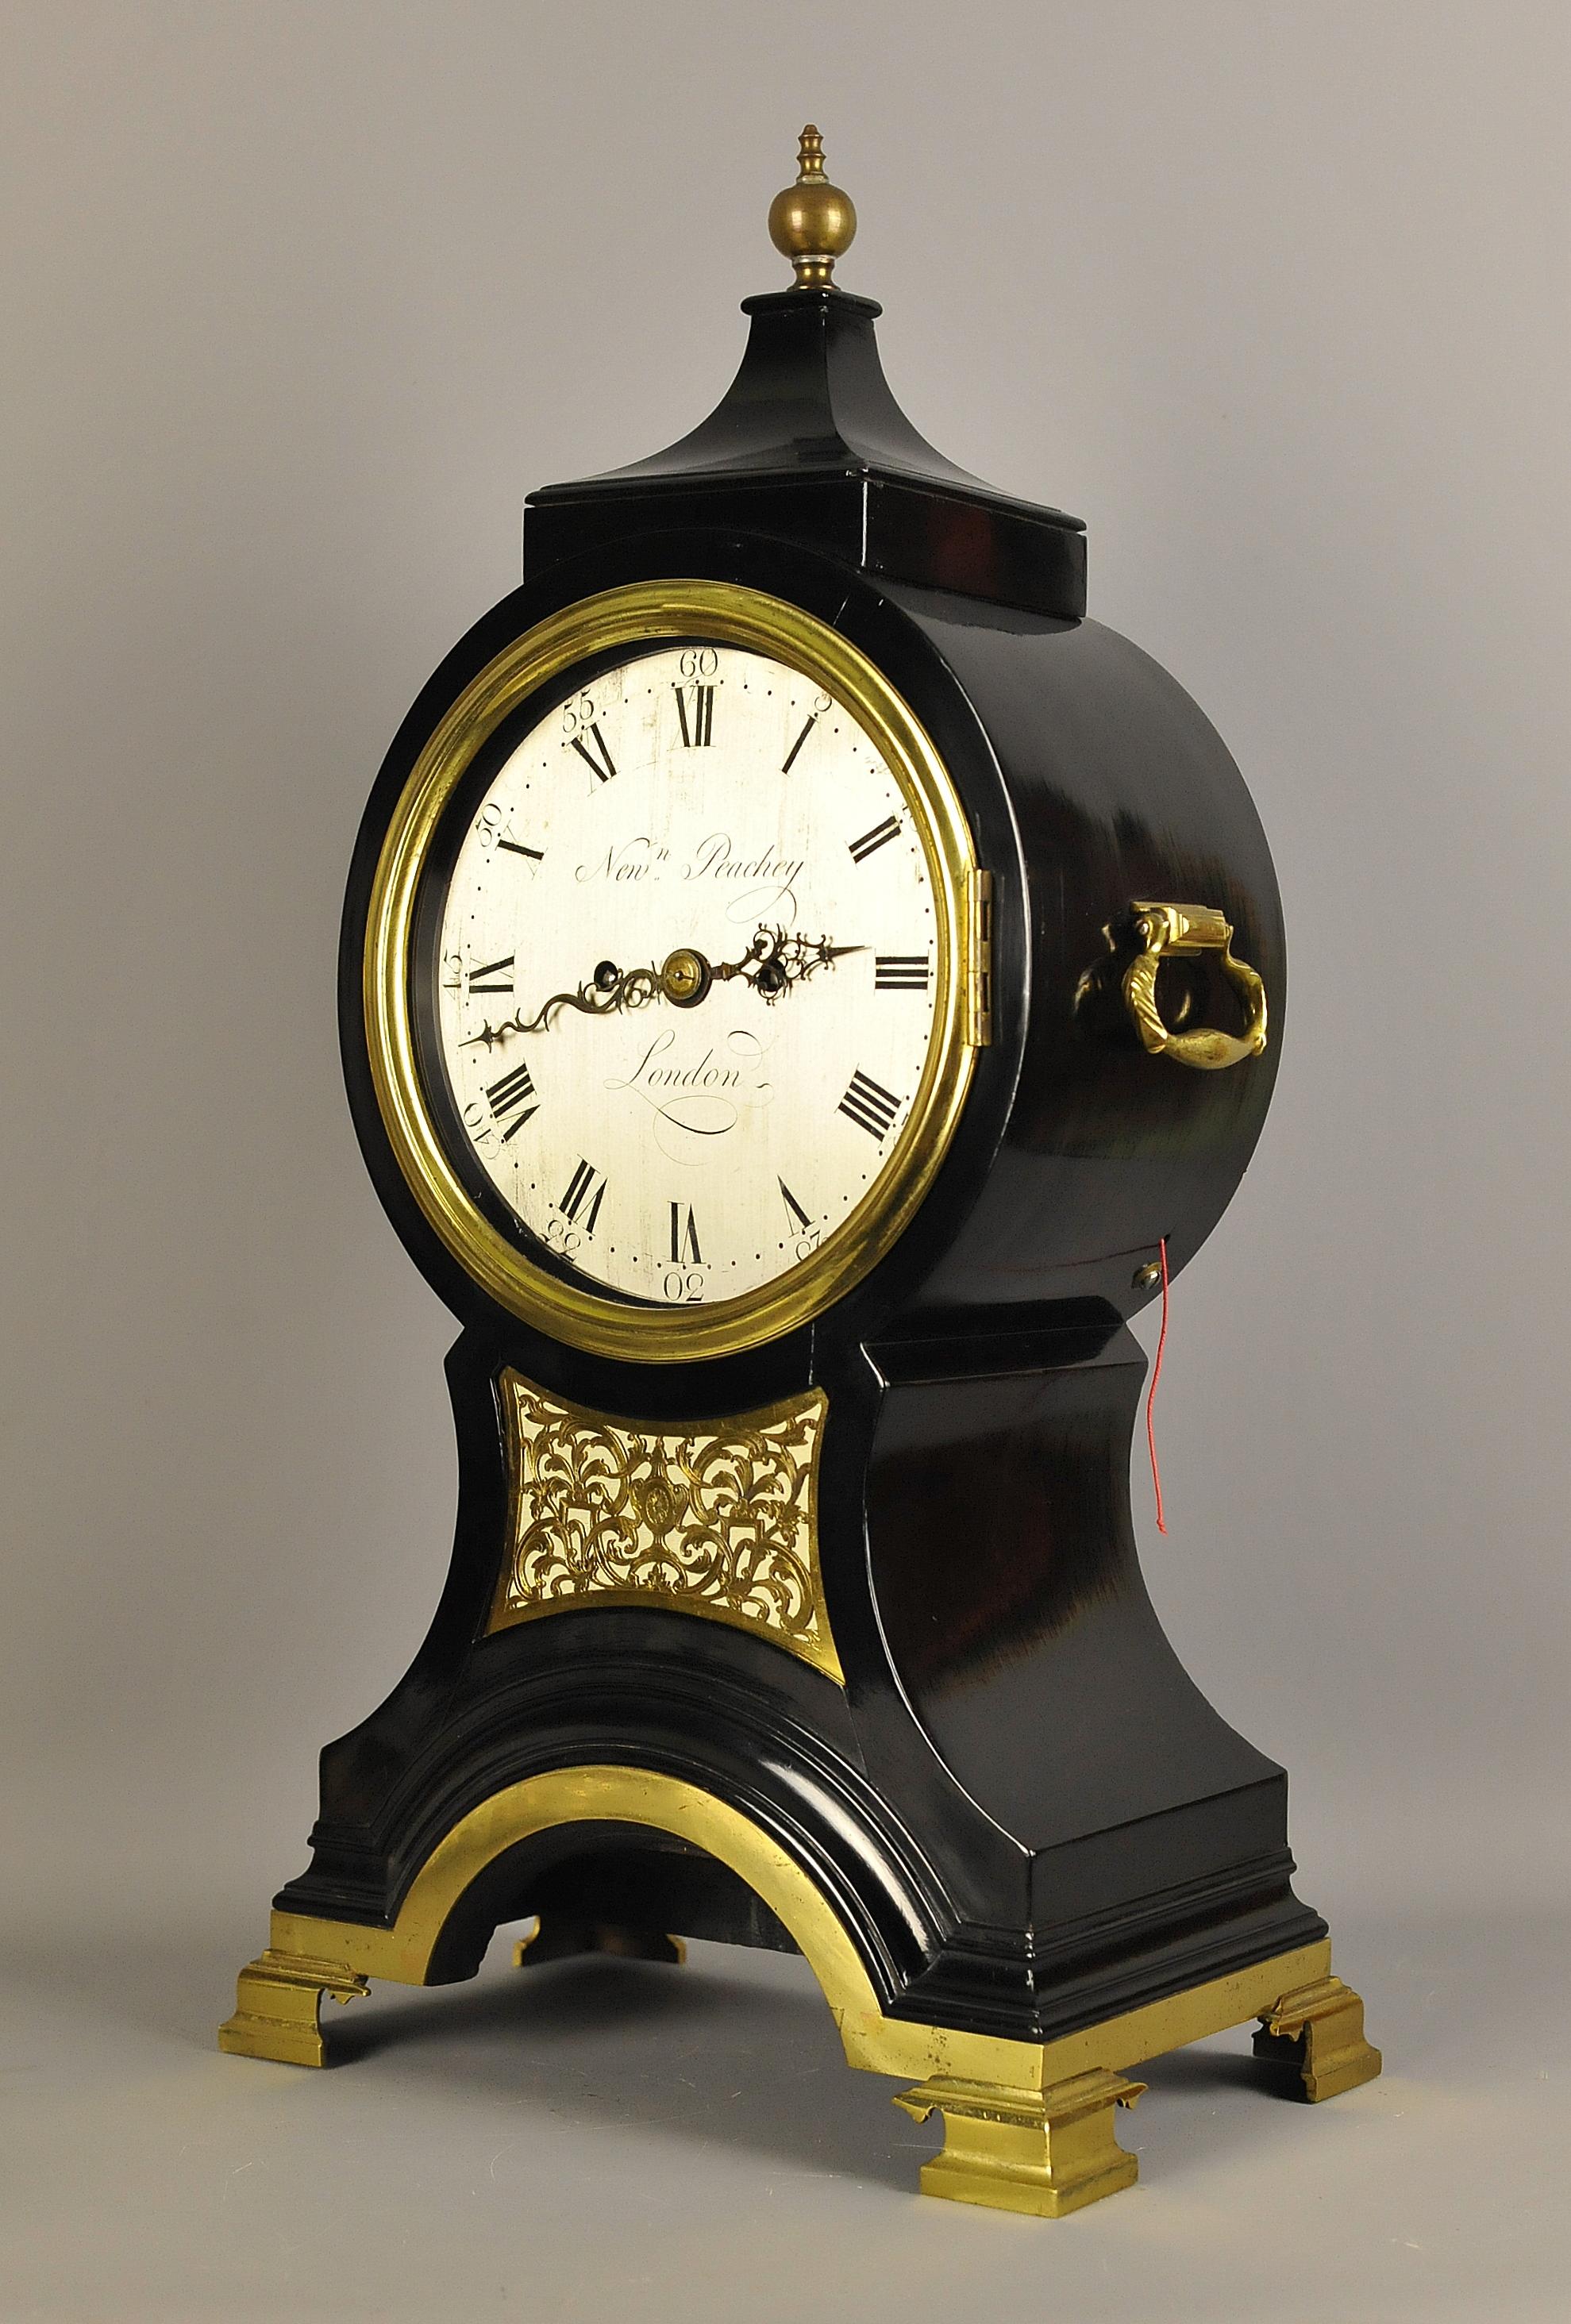 This is a fine ebonized English balloon clock dating from the Georgian period made by Newman Peachy who worked from Dean Street London circa from 1749 until his death in 1802. This clock will date circa 1780
This earlier style of balloon clock is